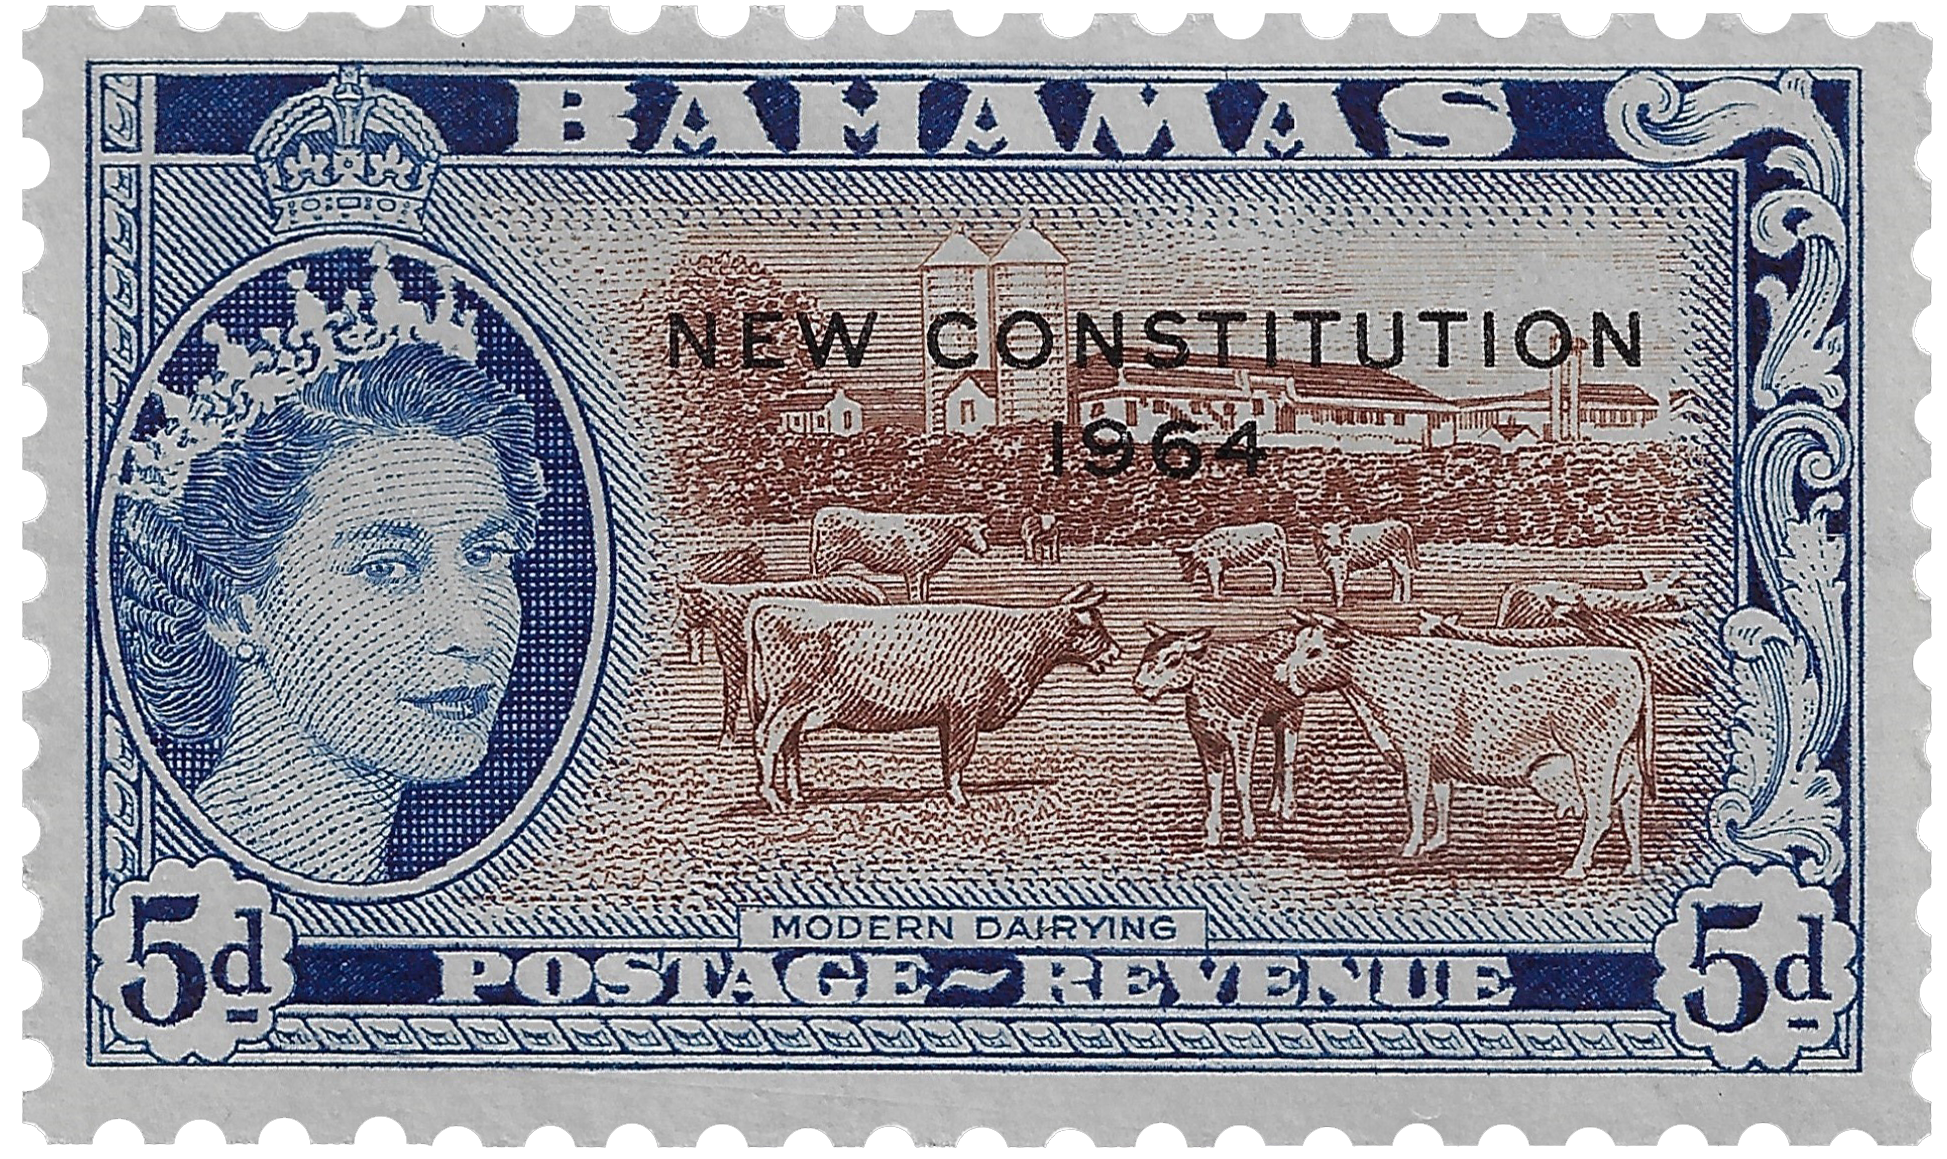 5d 1964, Modern Dairying, New Constitution